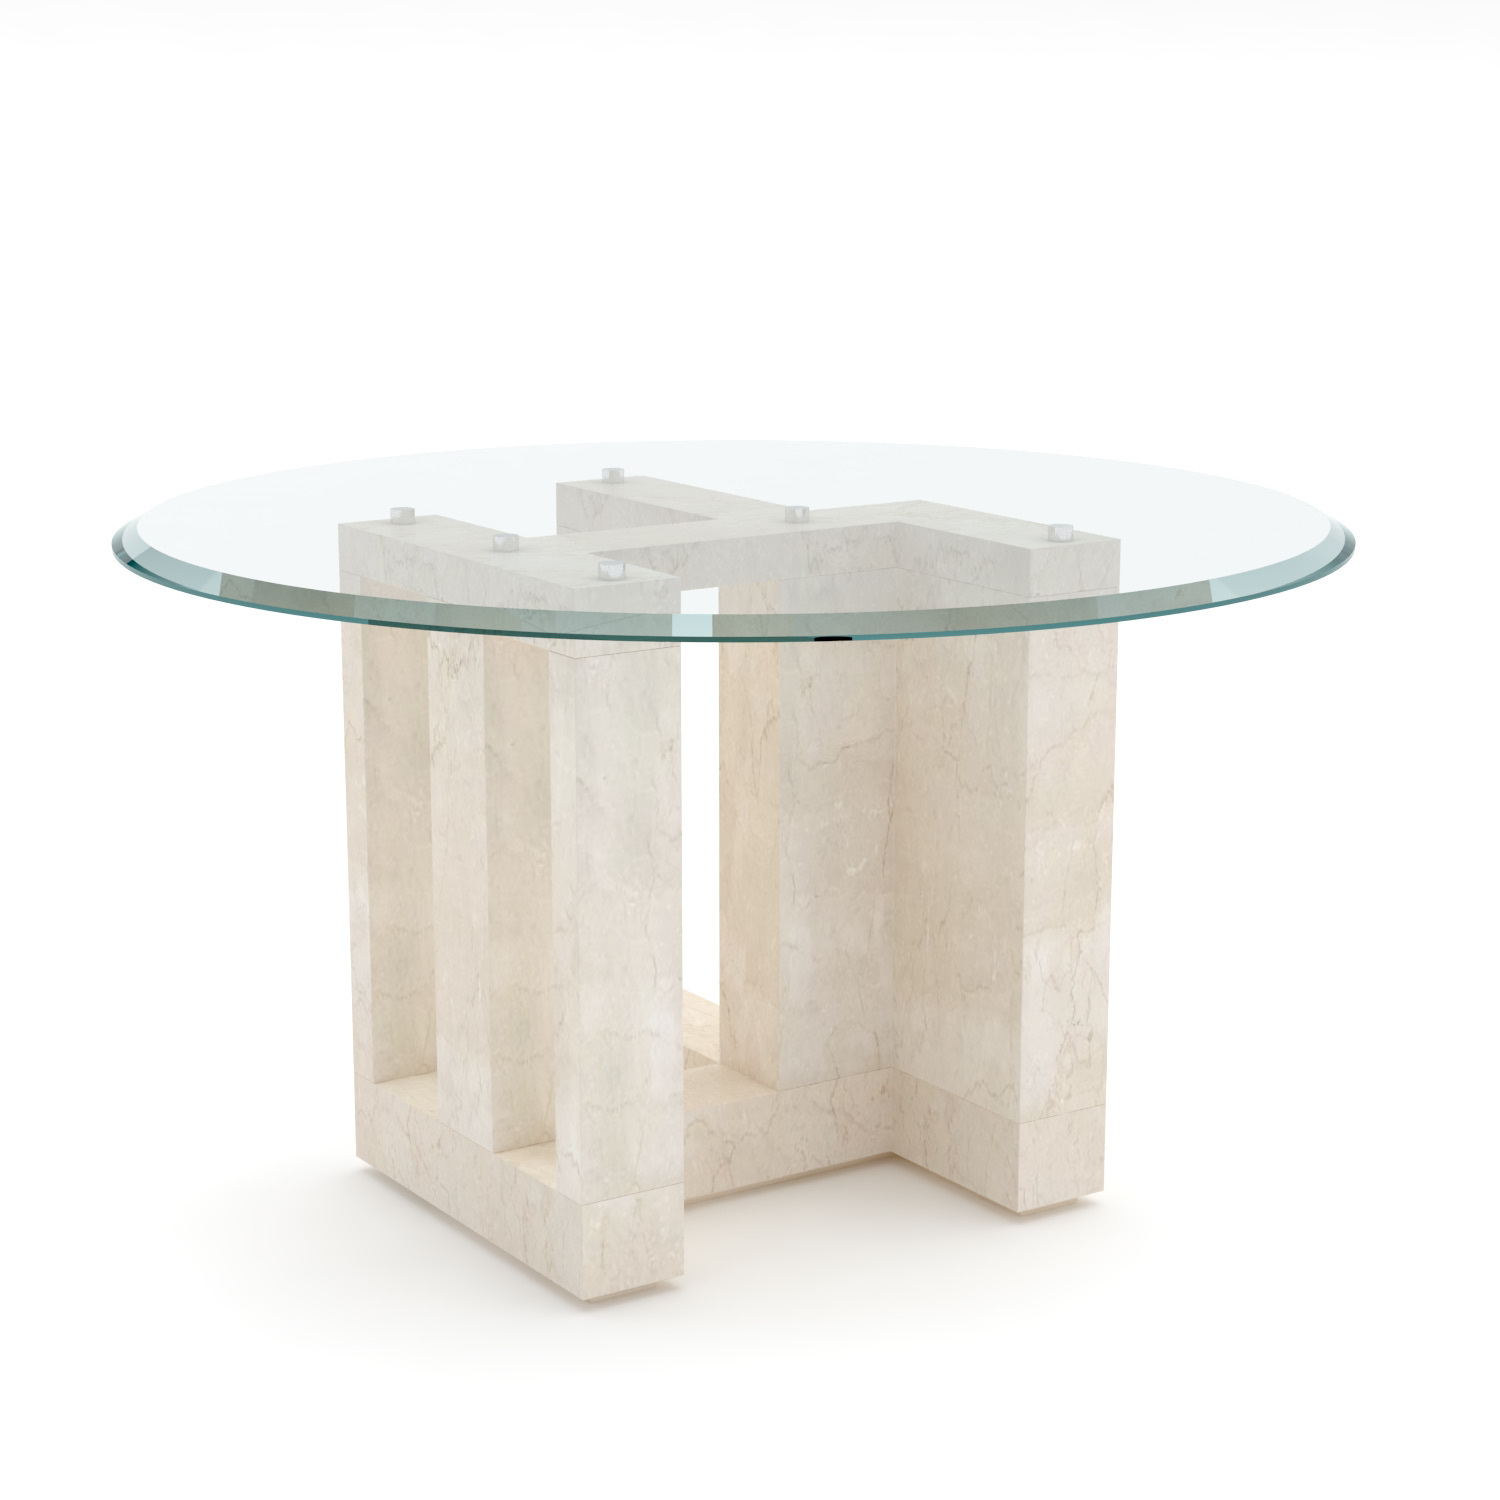 Archeology 1 - Marble and Glass Table